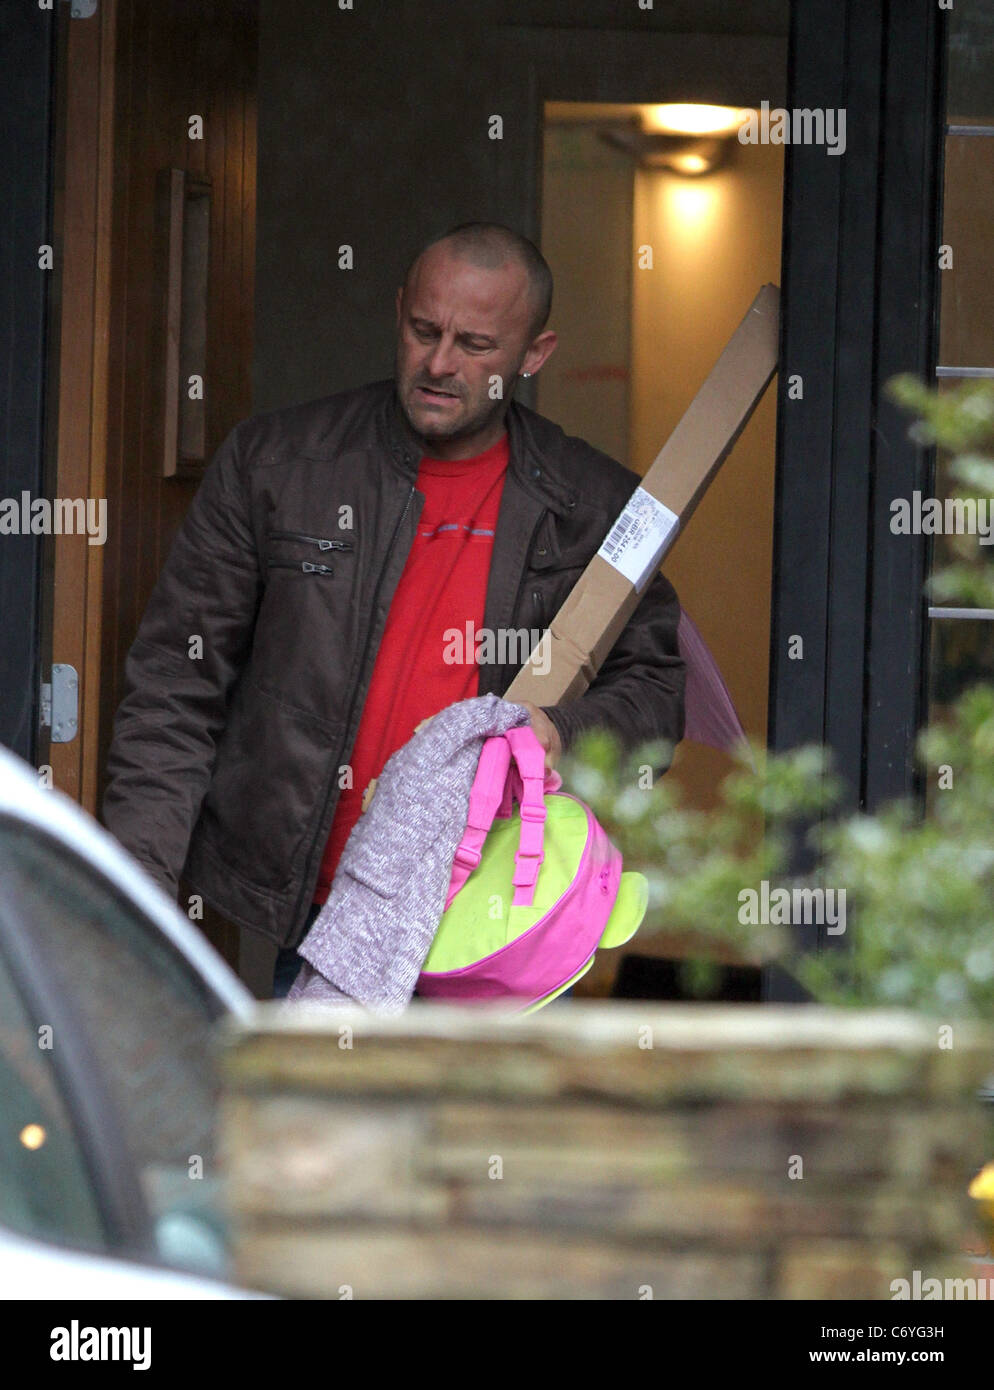 Mark Croft leaves Kerry Katona's home after collecting their children Cheshire, England - 20.03.10 Stock Photo